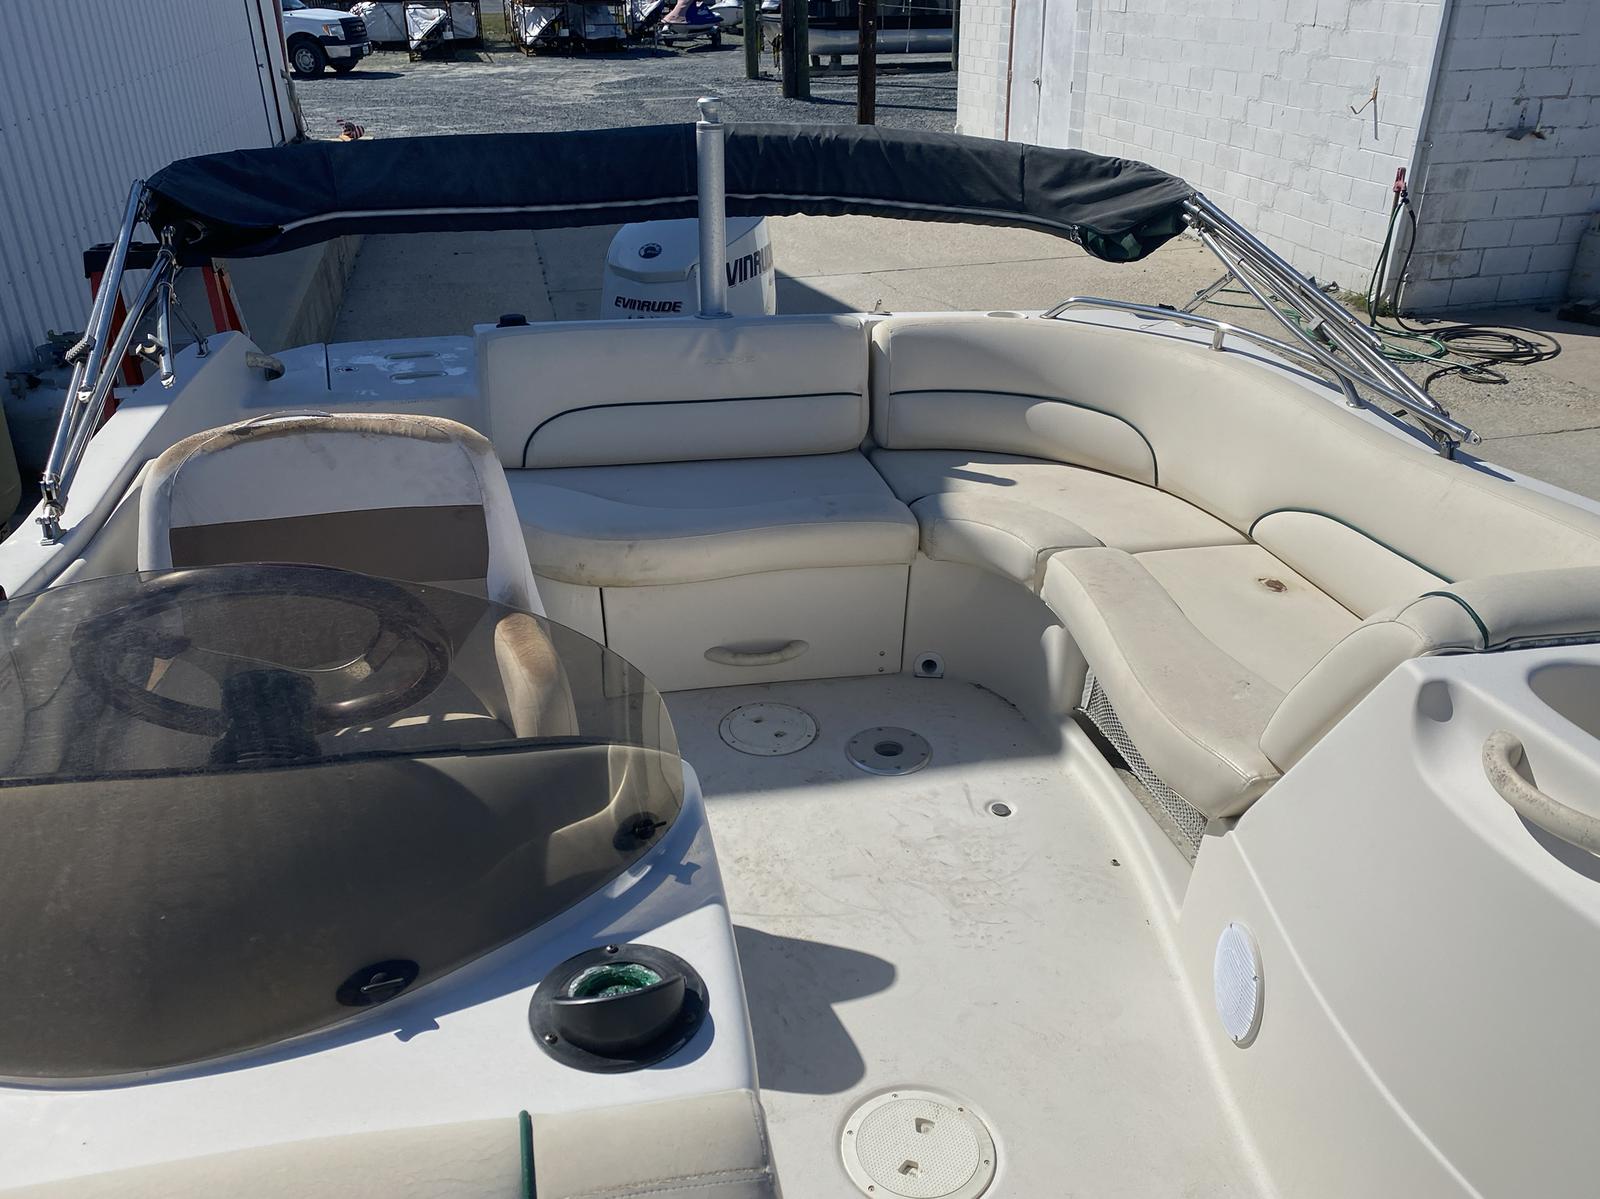 2005 Azure boat for sale, model of the boat is AZ210 & Image # 6 of 13